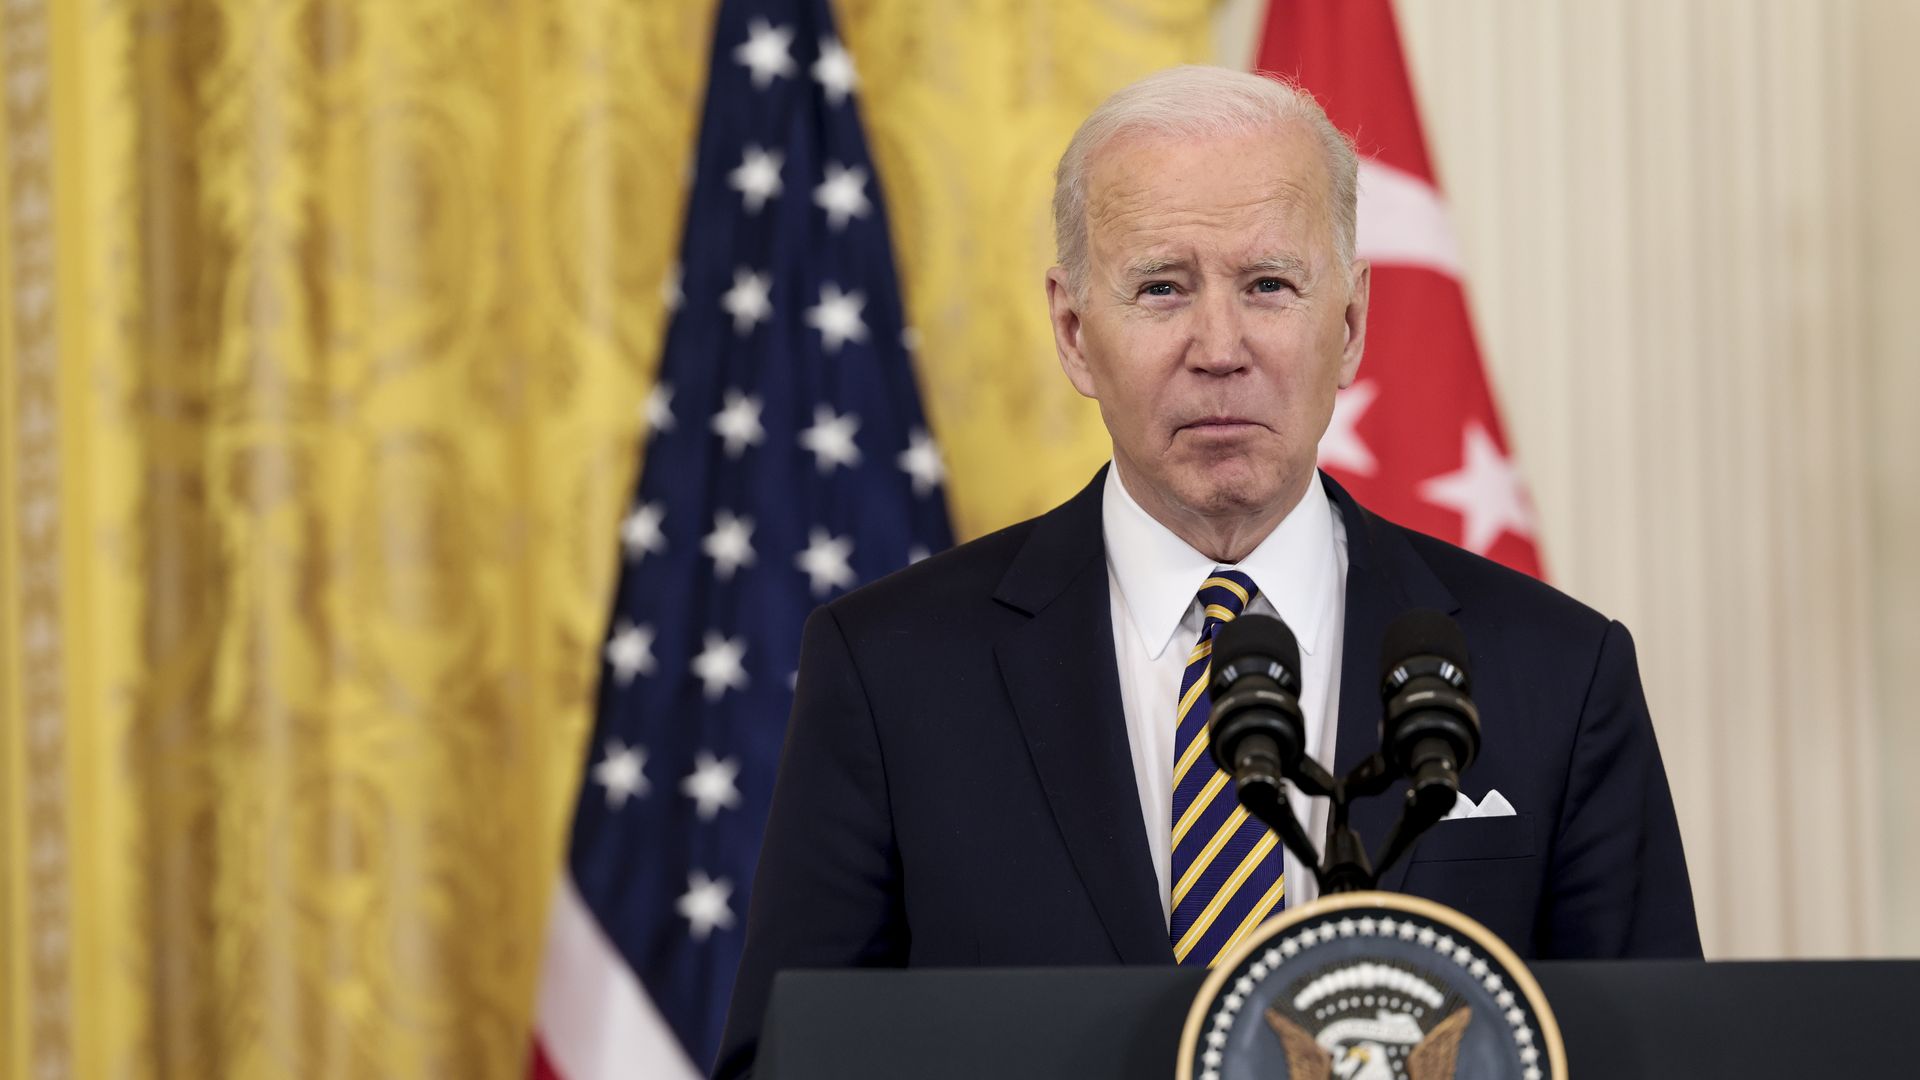  President Joe Biden delivers remarks alongside Prime Minister Lee Hsien Loong of Singapore in the East Room of the White House on March 29, 2022 in Washington, DC.